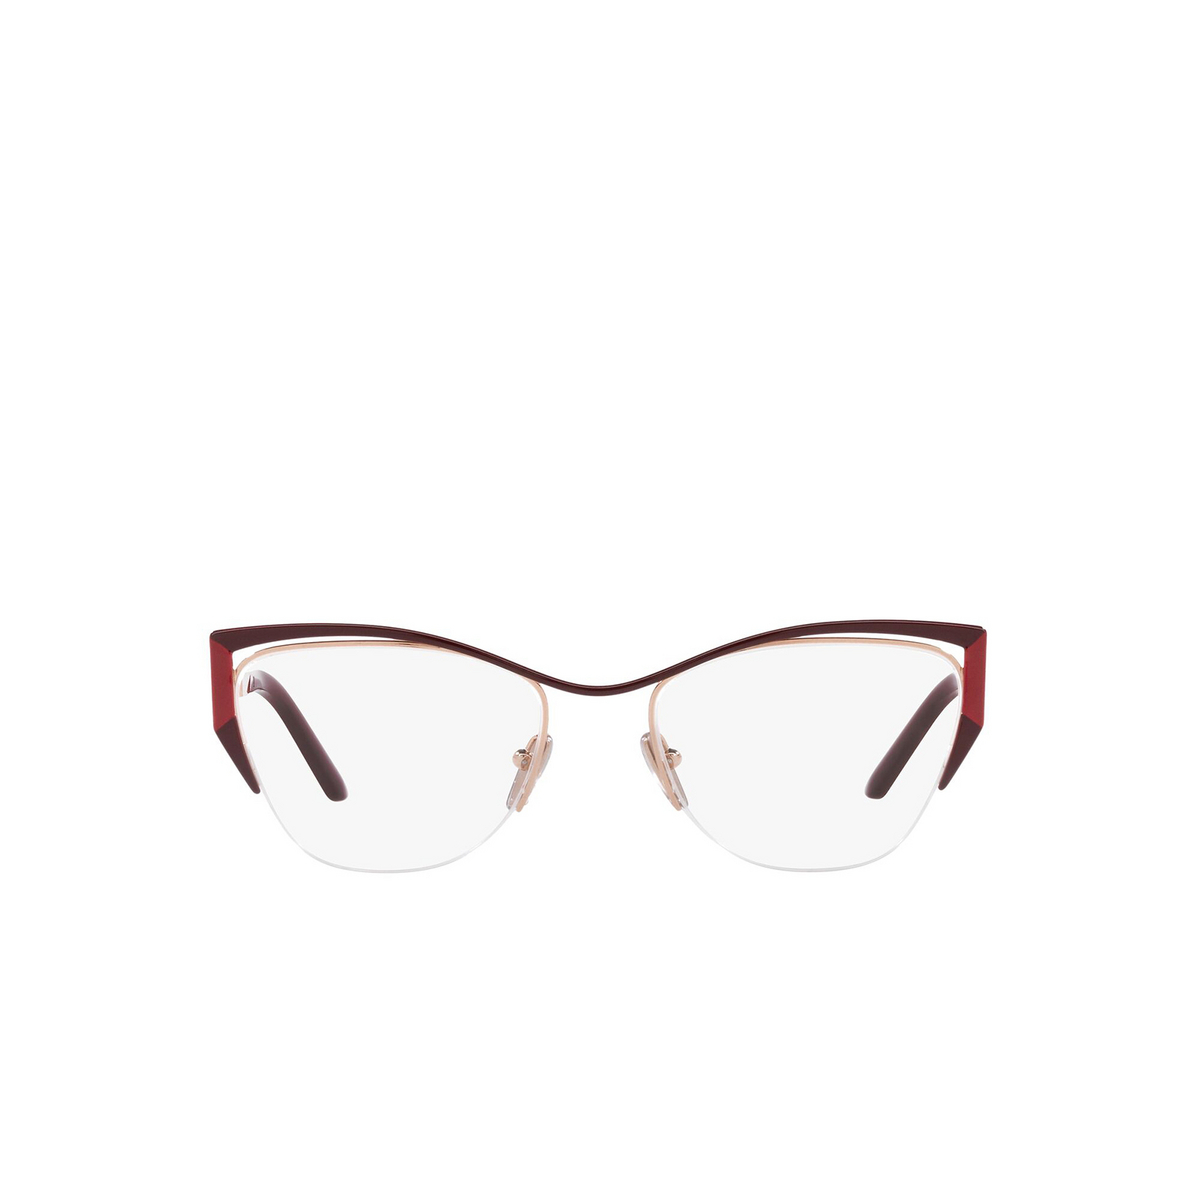 Prada® Butterfly Eyeglasses: PR 63YV color 13A1O1 Red / Fire / Rose Gold - front view